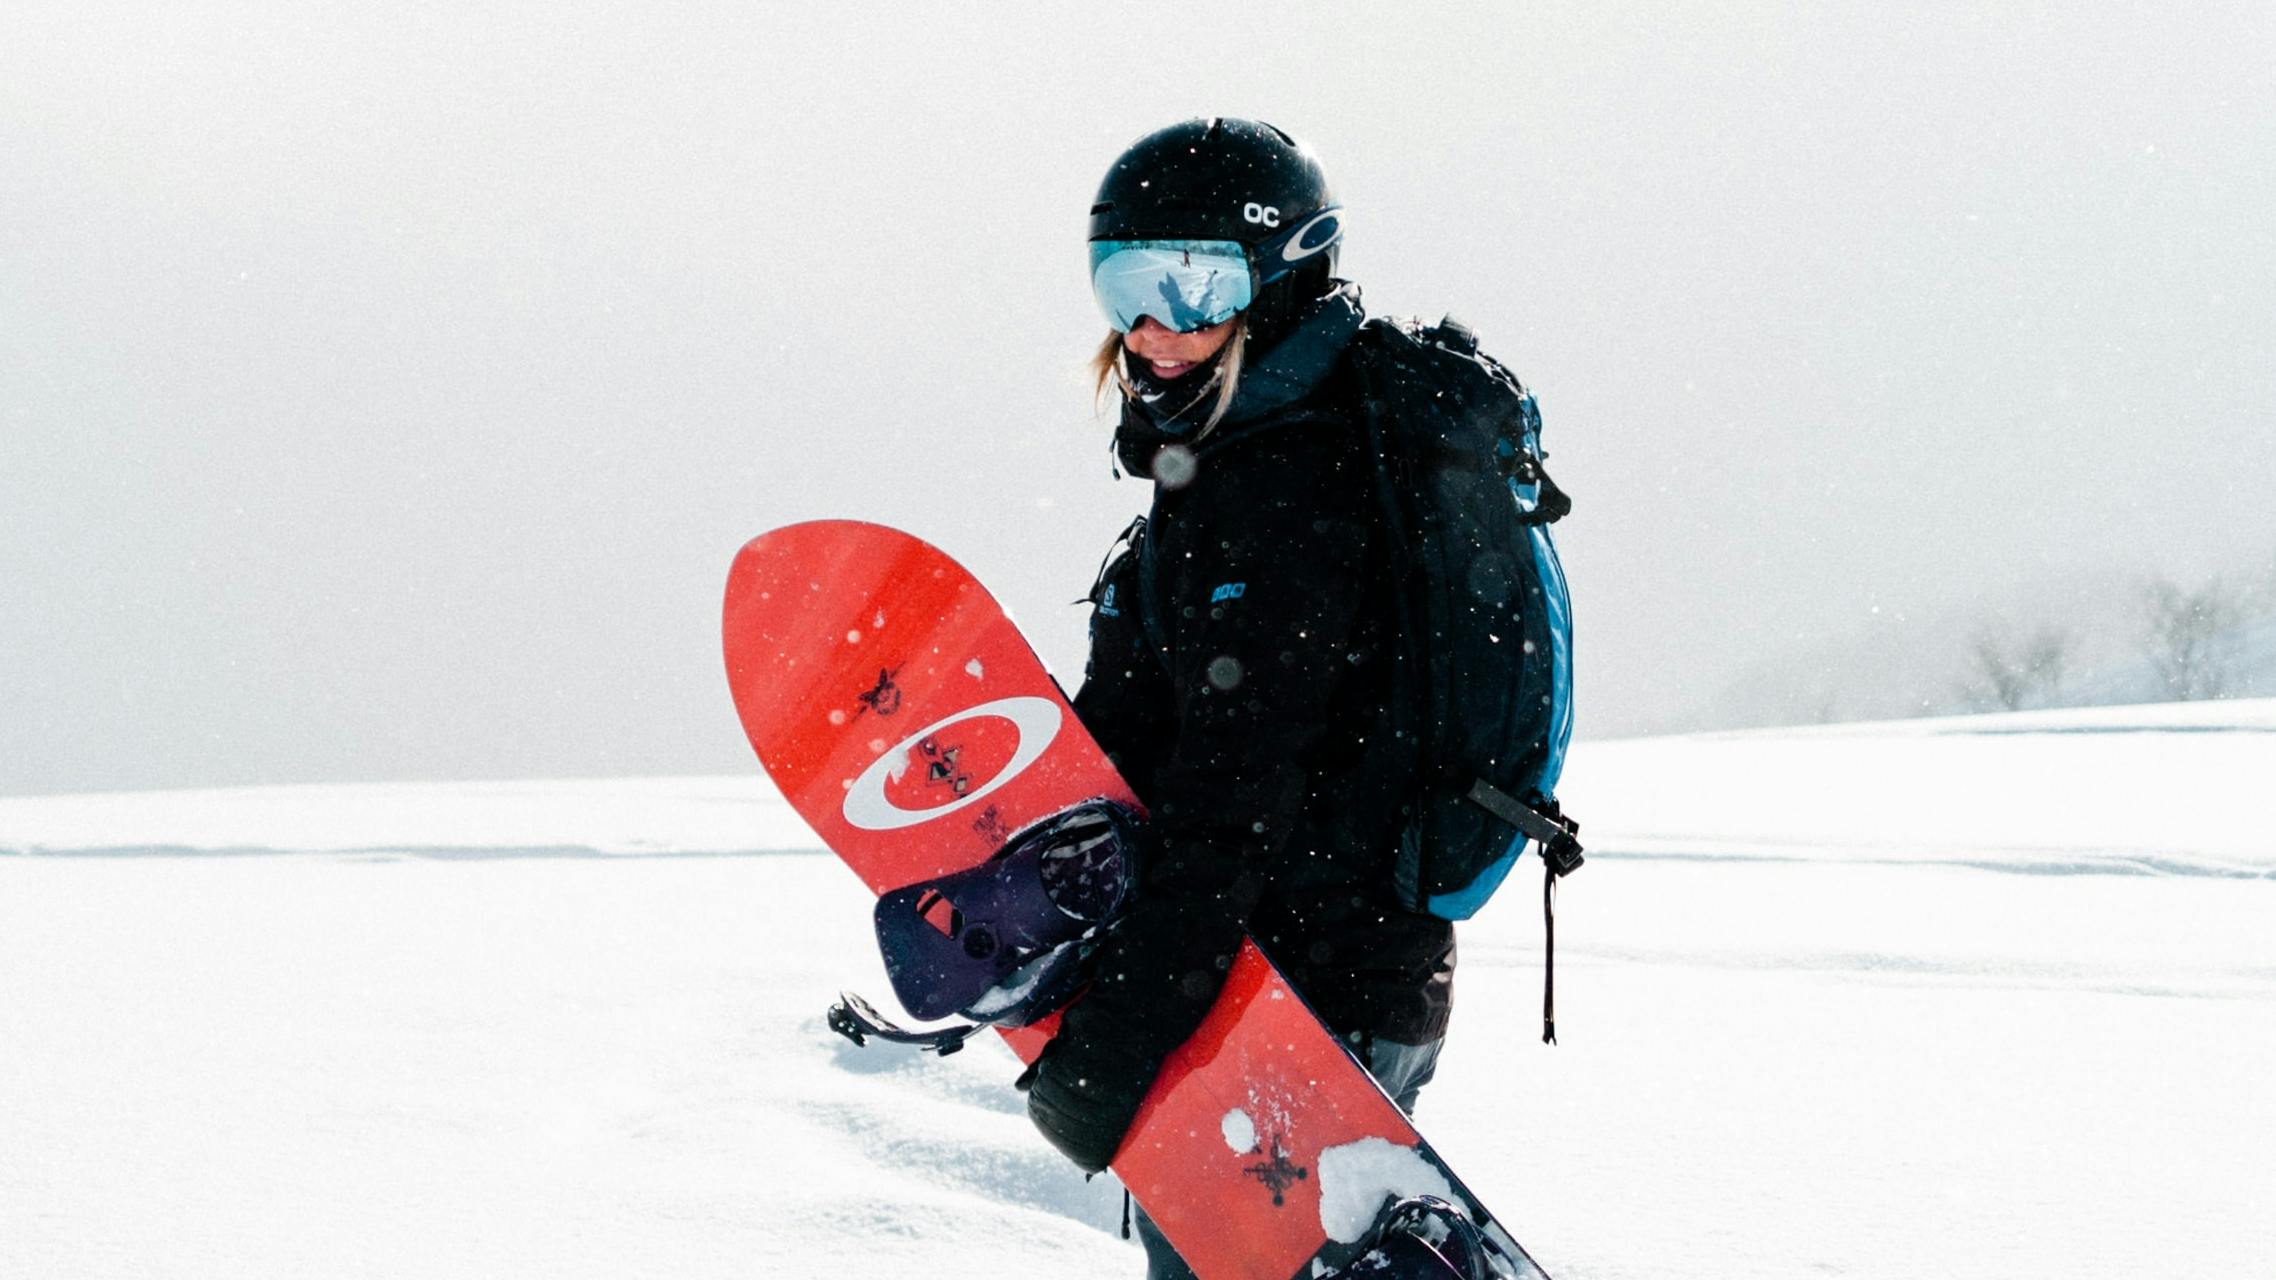 A woman stands and looks back at the camera while carrying a red snowboard and reflective goggles. The landscape around her is totally white and snowy.